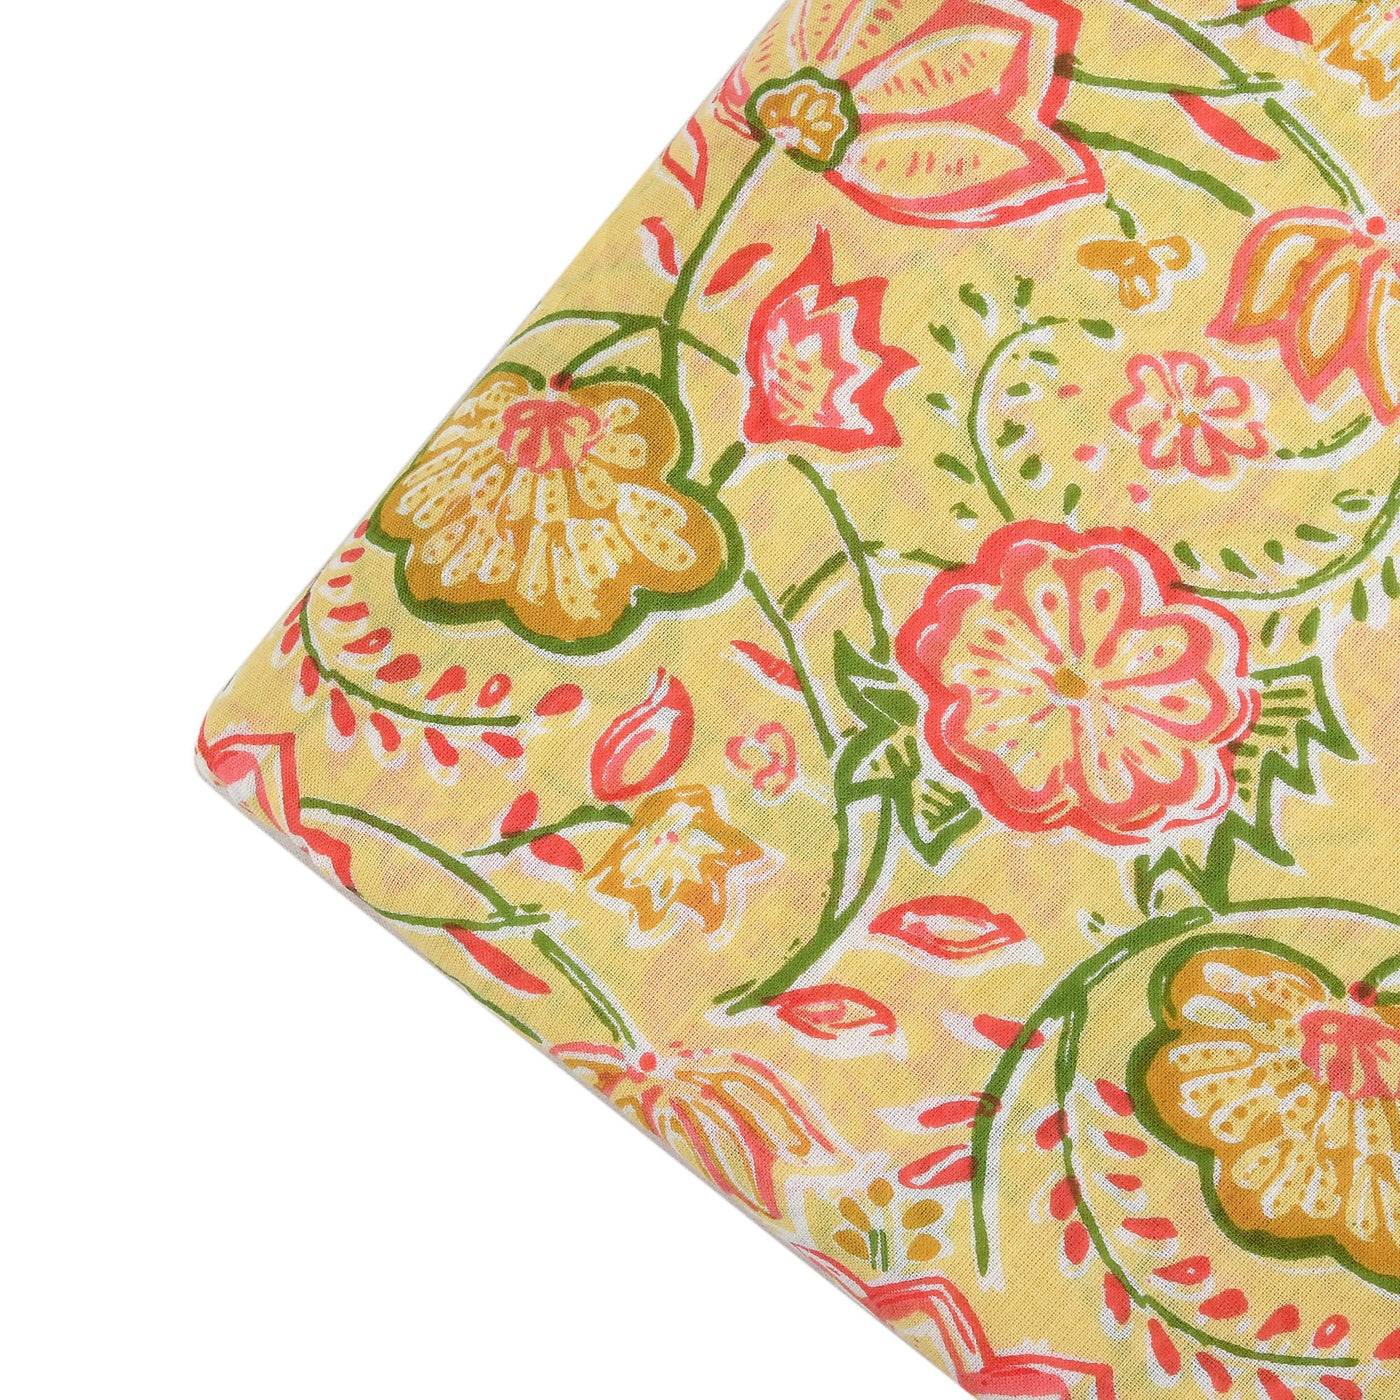 Banana Yellow, Punch Pink, Green Indian Floral Printed 100% Pure Cotton Cloth, Fabric by the yard, Women's Clothing Curtains Cushions Bags